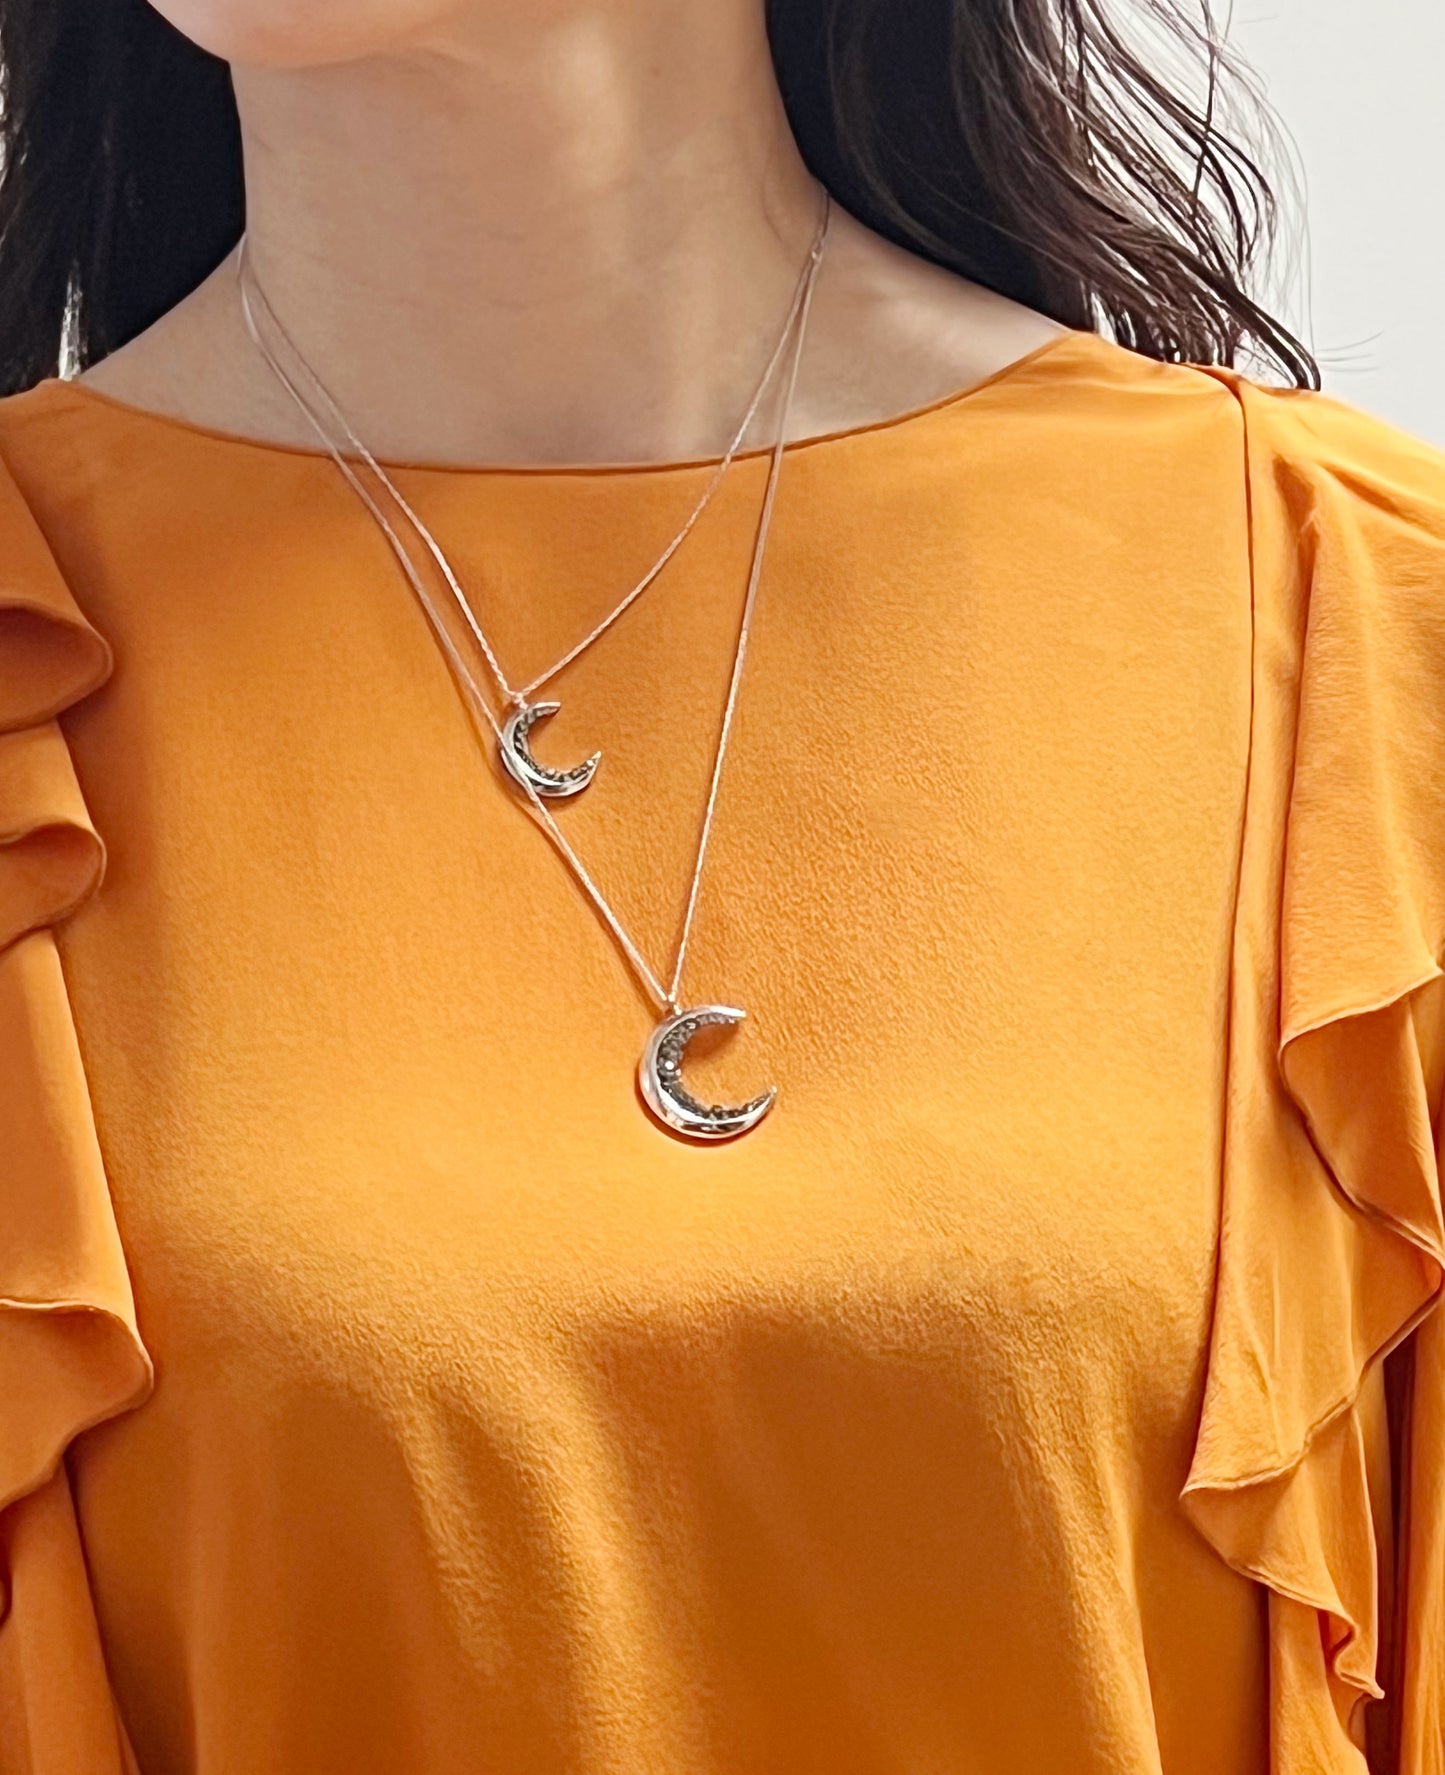 Crescent moon pendant Necklace detailed with Black Diamond Crystals